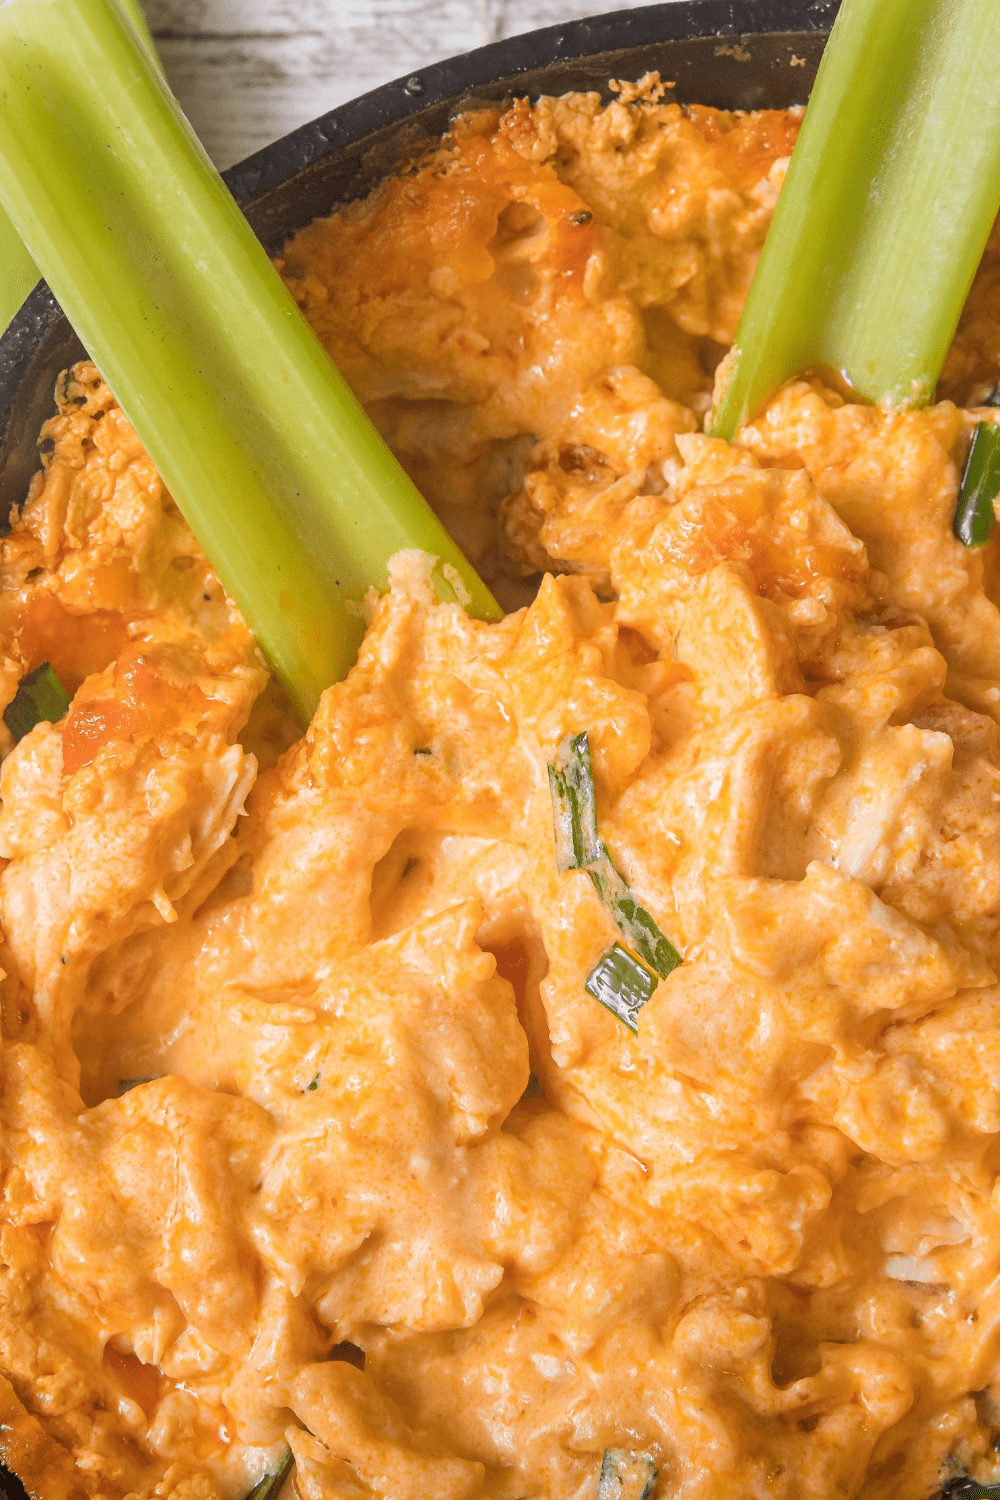 Celery sticks dipped in a bowl of Buffalo Chicken Dip